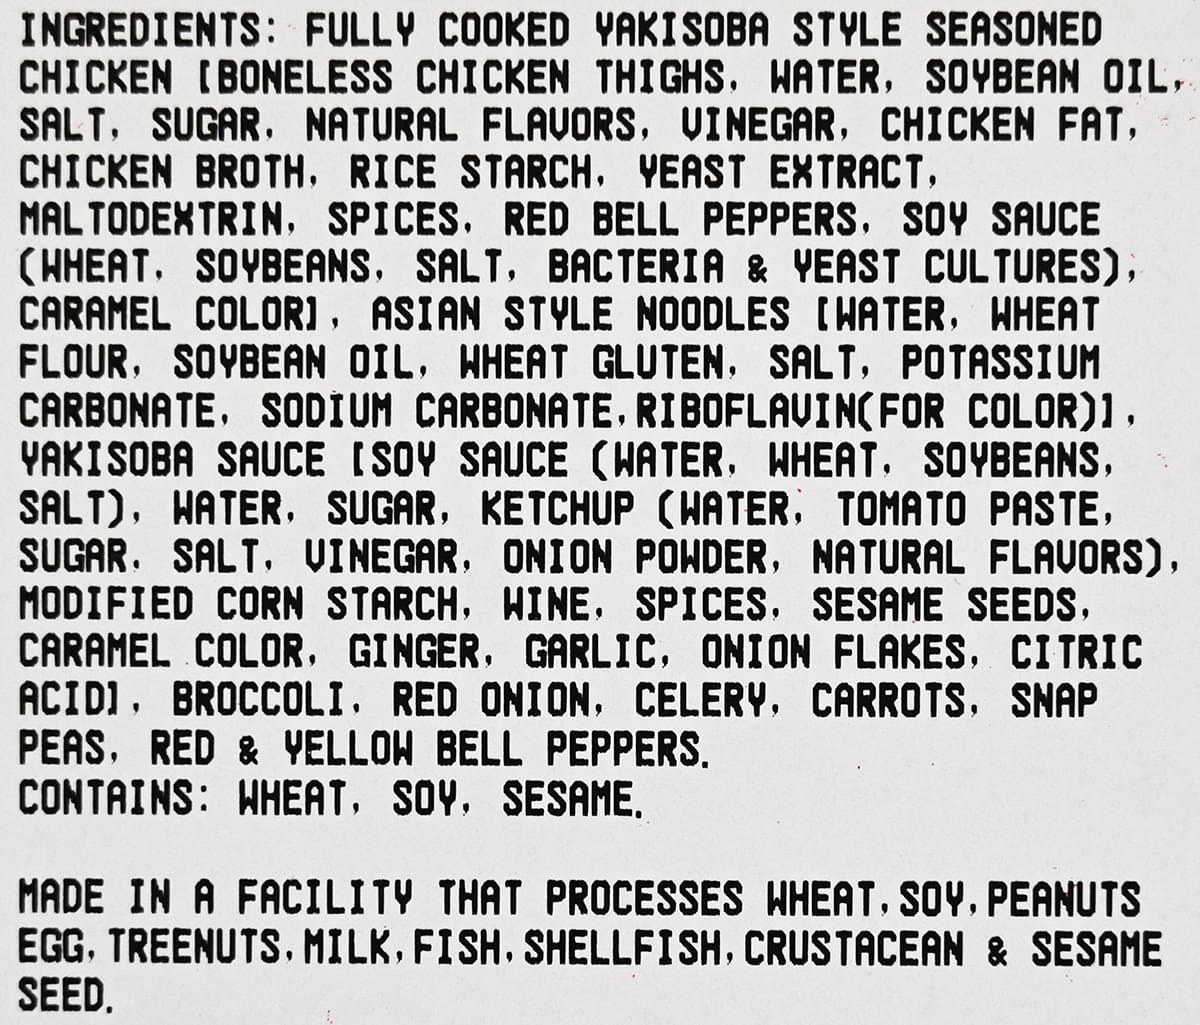 Closeup image of the ingredients list for the yakisoba from the front label.